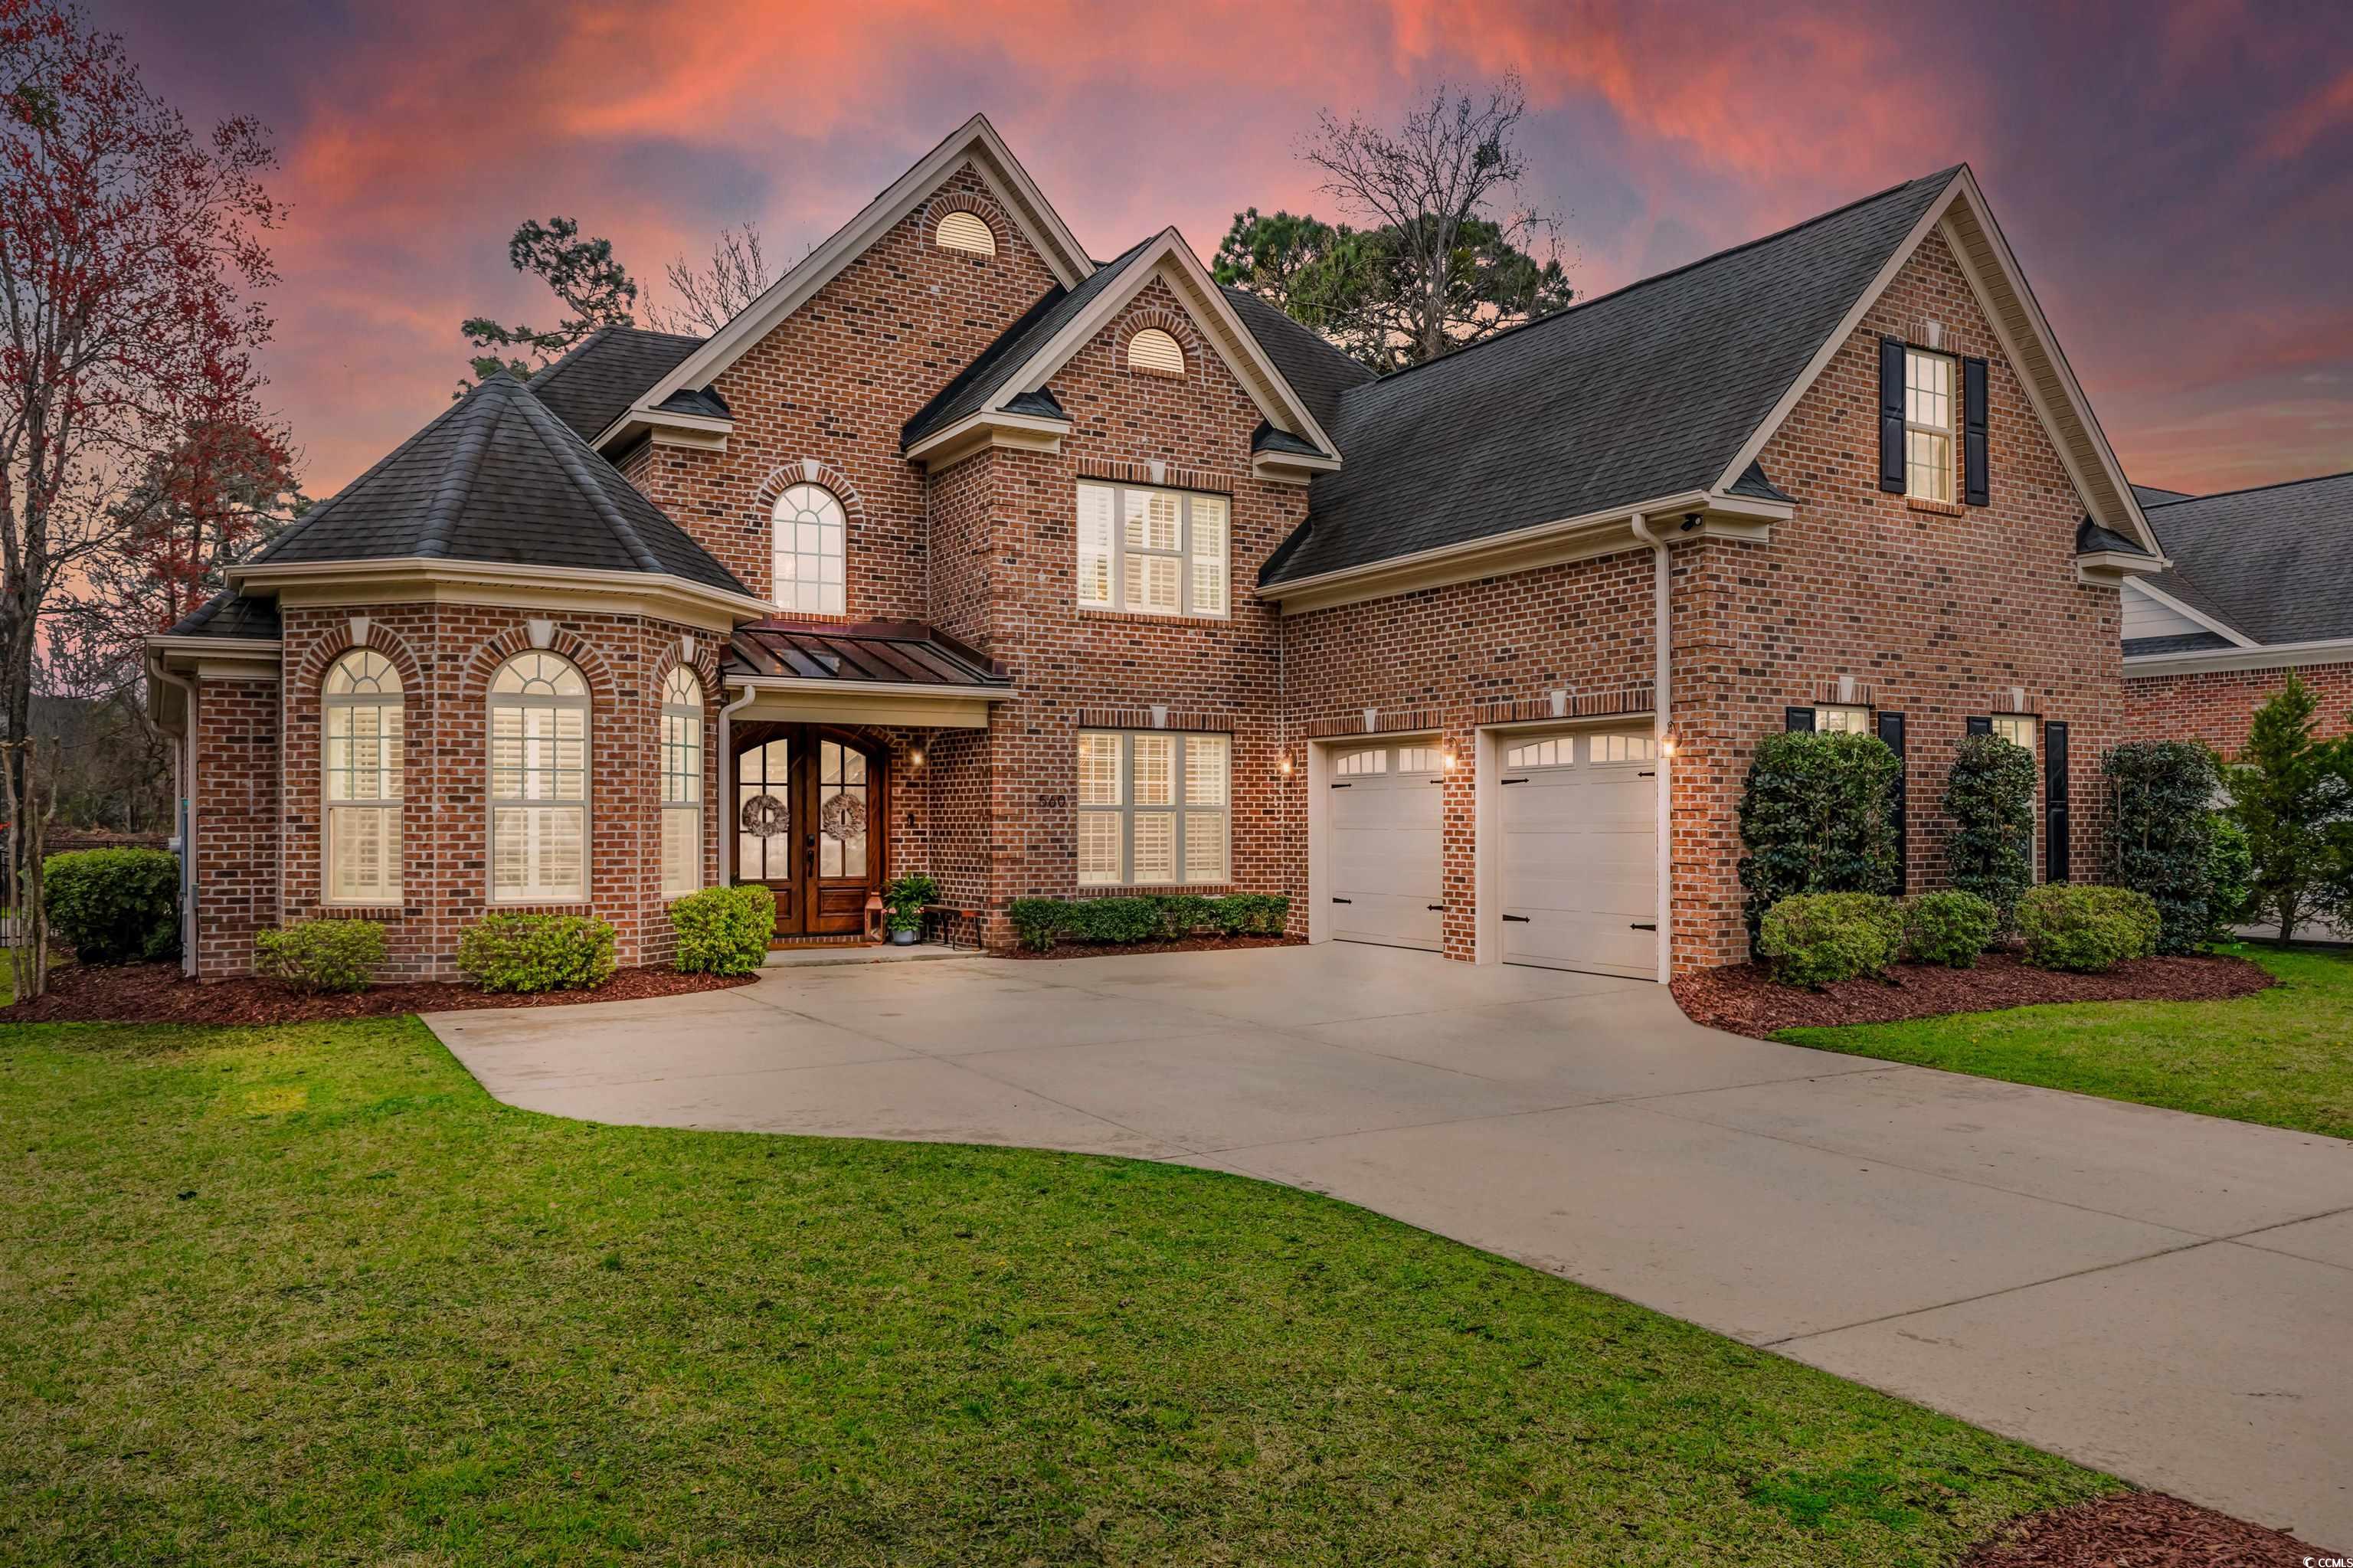 this magnificent custom built all brick home has it all. from the moment you pull into the oversized drive, you will notice thecraftsmanship. enter through the arched double doors and immediately your eyes are drawn to overflowing natural light in the spaciousgreat room with an abundance of windows. as you move into the kitchen, you will appreciate that this is an entertainers' dream includingplenty of cabinet space, an oversized island, farmhouse style sink, stainless steel appliances, gas cooktop and walk in pantry. you willlove being able to host guests with a spacious eat in kitchen area, formal dining room, as well as a cozy den complete with a fireplaceand custom built in cabinetry. the split floor plan allows privacy and a retreat for the owners on the left side of the home. a spaciousbedroom is the perfect place to unwind and relax. the sprawling bathroom includes a sparkling tiled walk in shower, deep soaking tub,double vanity and private water closet. the suite also includes the dream closet for the clothing connoisseur with a generous island andplenty of storage. you can also enjoy coffee and spectacular sunrise and sunset on your screened in back porch. on the right side ofthe home your guests will enjoy their own private space with a spacious bed and bath. the laundry room is also conveniently located offthe garage entrance. upstairs enjoy the flexibility of 3 more generous bedrooms, large landing space that can be used as an office orplayroom and a full sized bathroom. this home also offers plenty of function with a 2 car garage that was extended with a 3rd bay. itallows room for your cars, toys, extra utility storage and more. the back yard is a continuation of space to entertain with a new 1000square foot paver patio, plenty of room to dine and relax, as well as a fenced in yard. plenty of room to build your dream pool in thefuture. also, maintain your yard with ease through a 5 zone irrigation system, using rachio head unit that is managed right at yourfingertips through a phone app. plantation lakes gives owners access to first class amenities including a clubhouse, volleyball courts,lighted tennis courts and a securely fenced children's playground. you'll enjoy access to 15 miles of shoreline in these private lakes, daydock access, & sidewalks. located in carolina forest and just minutes from shopping, dining, award winning schools, bike trails,medical offices and more. all while being conveniently located in driving distance to the miles of coastline, beaches and the sparklingatlantic ocean. book your showing today! there's just not many homes that offer all of this in the carolina forest area.